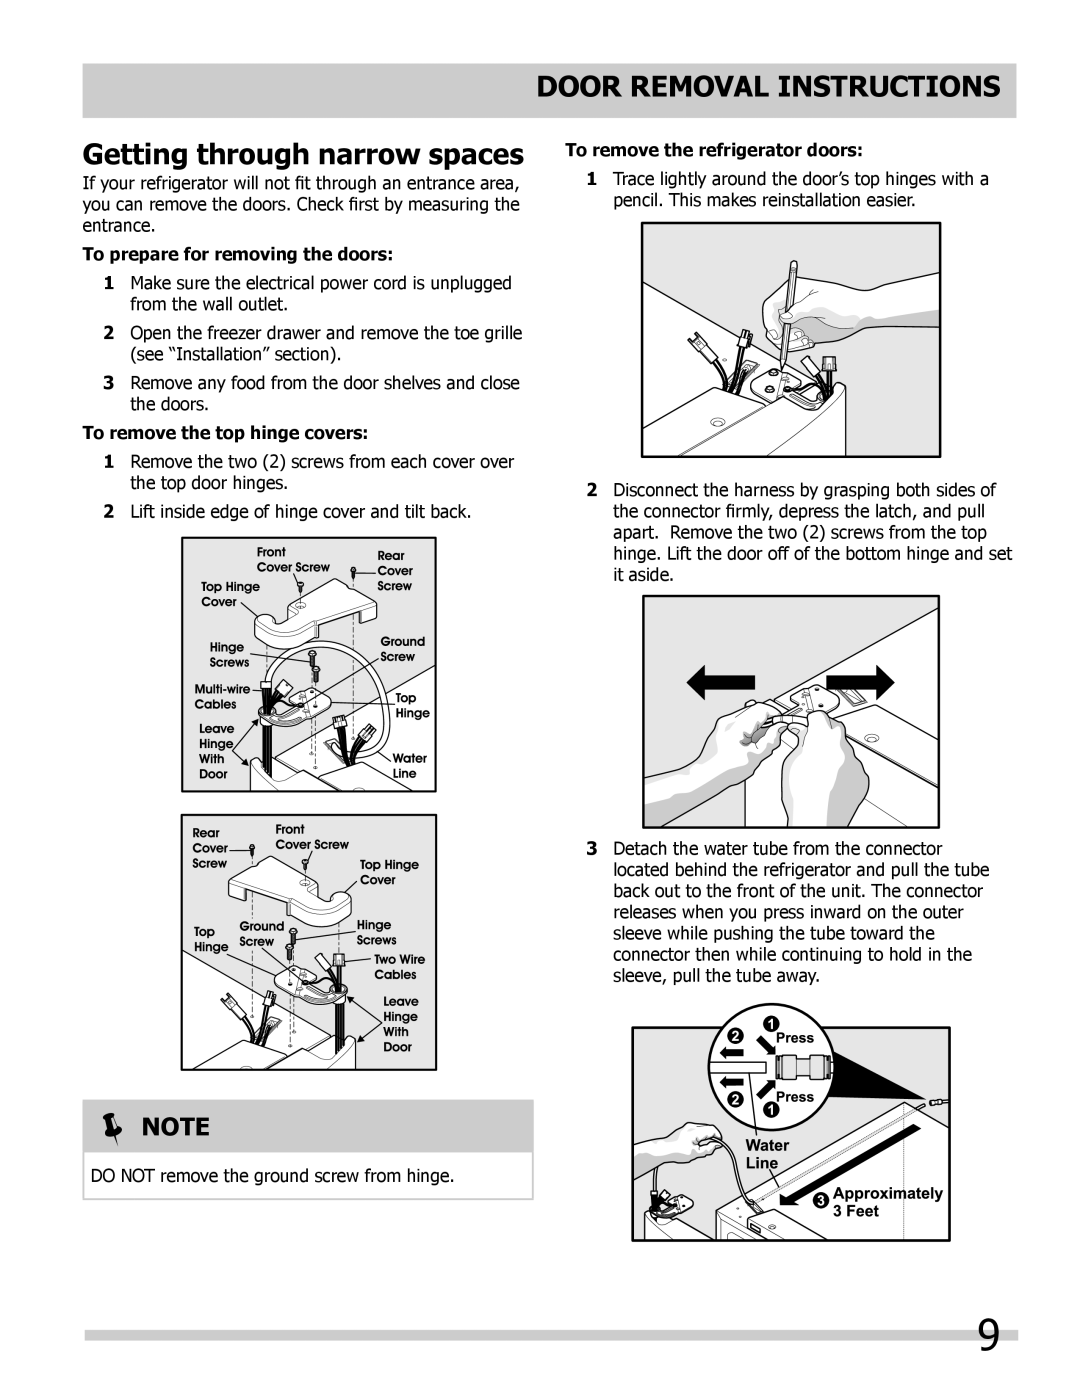 Frigidaire FGHB2844LF5 Door Removal Instructions, Getting through narrow spaces, To prepare for removing the doors, Note 